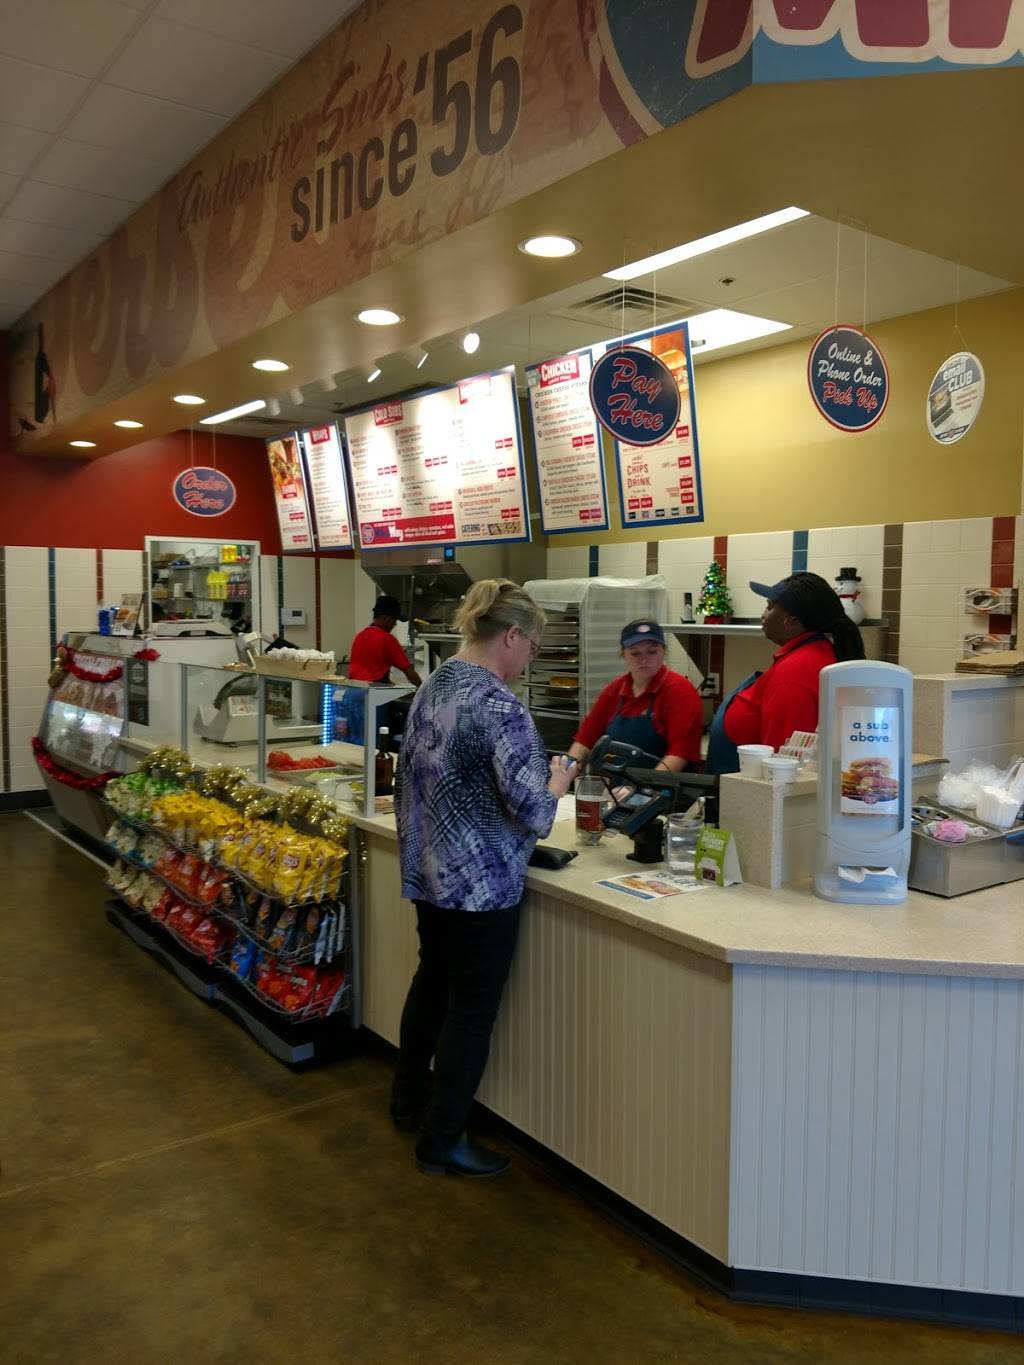 jersey mike's temple